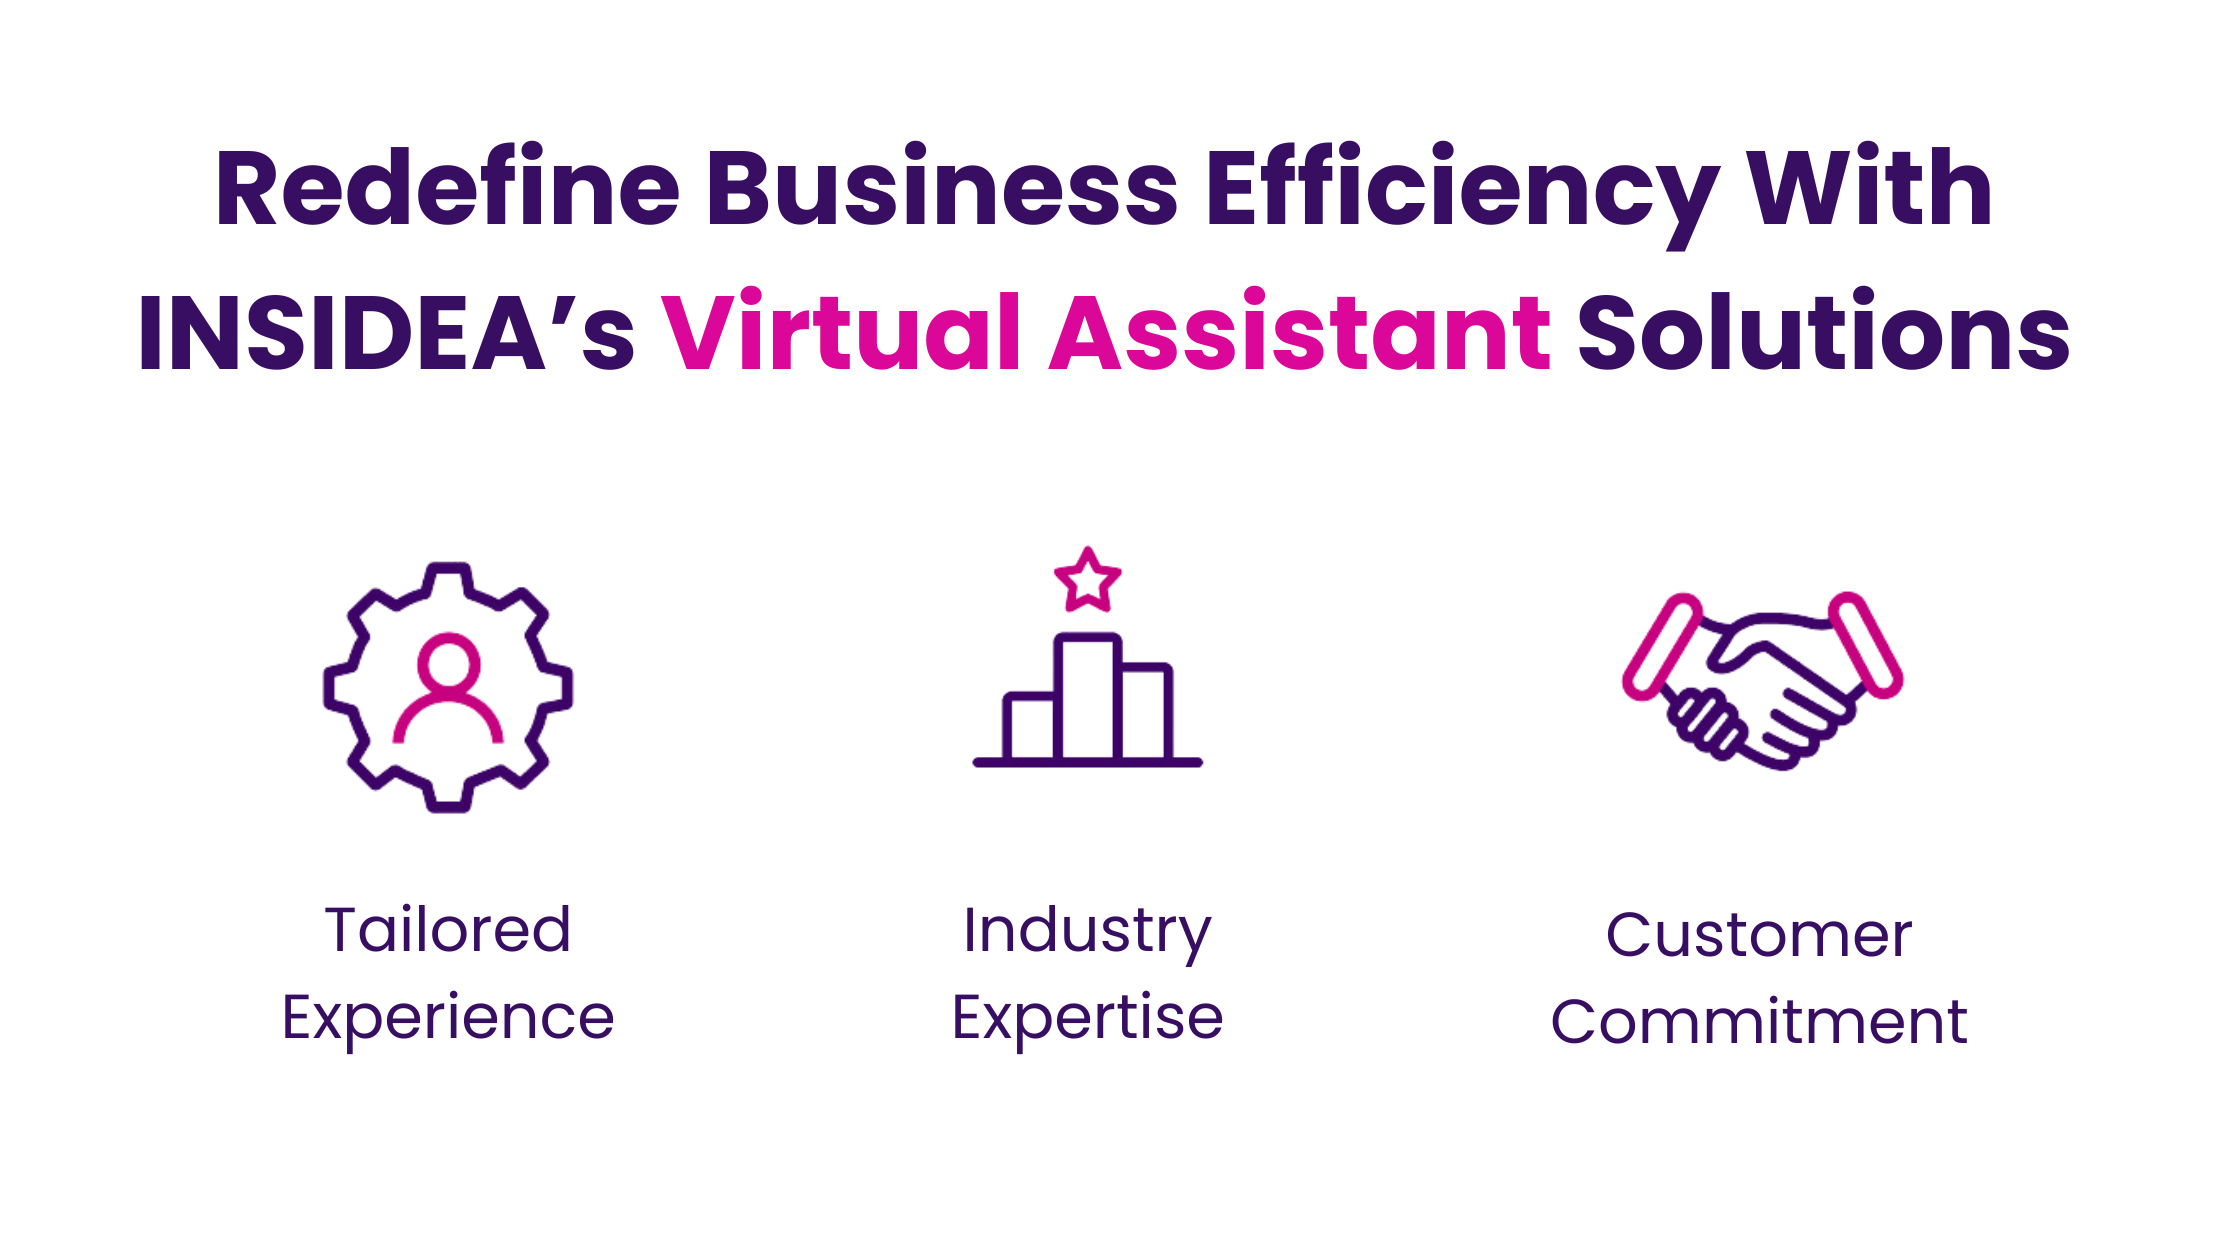 Redefine Business Efficiency With INSIDEA’s Virtual Assistant Solutions